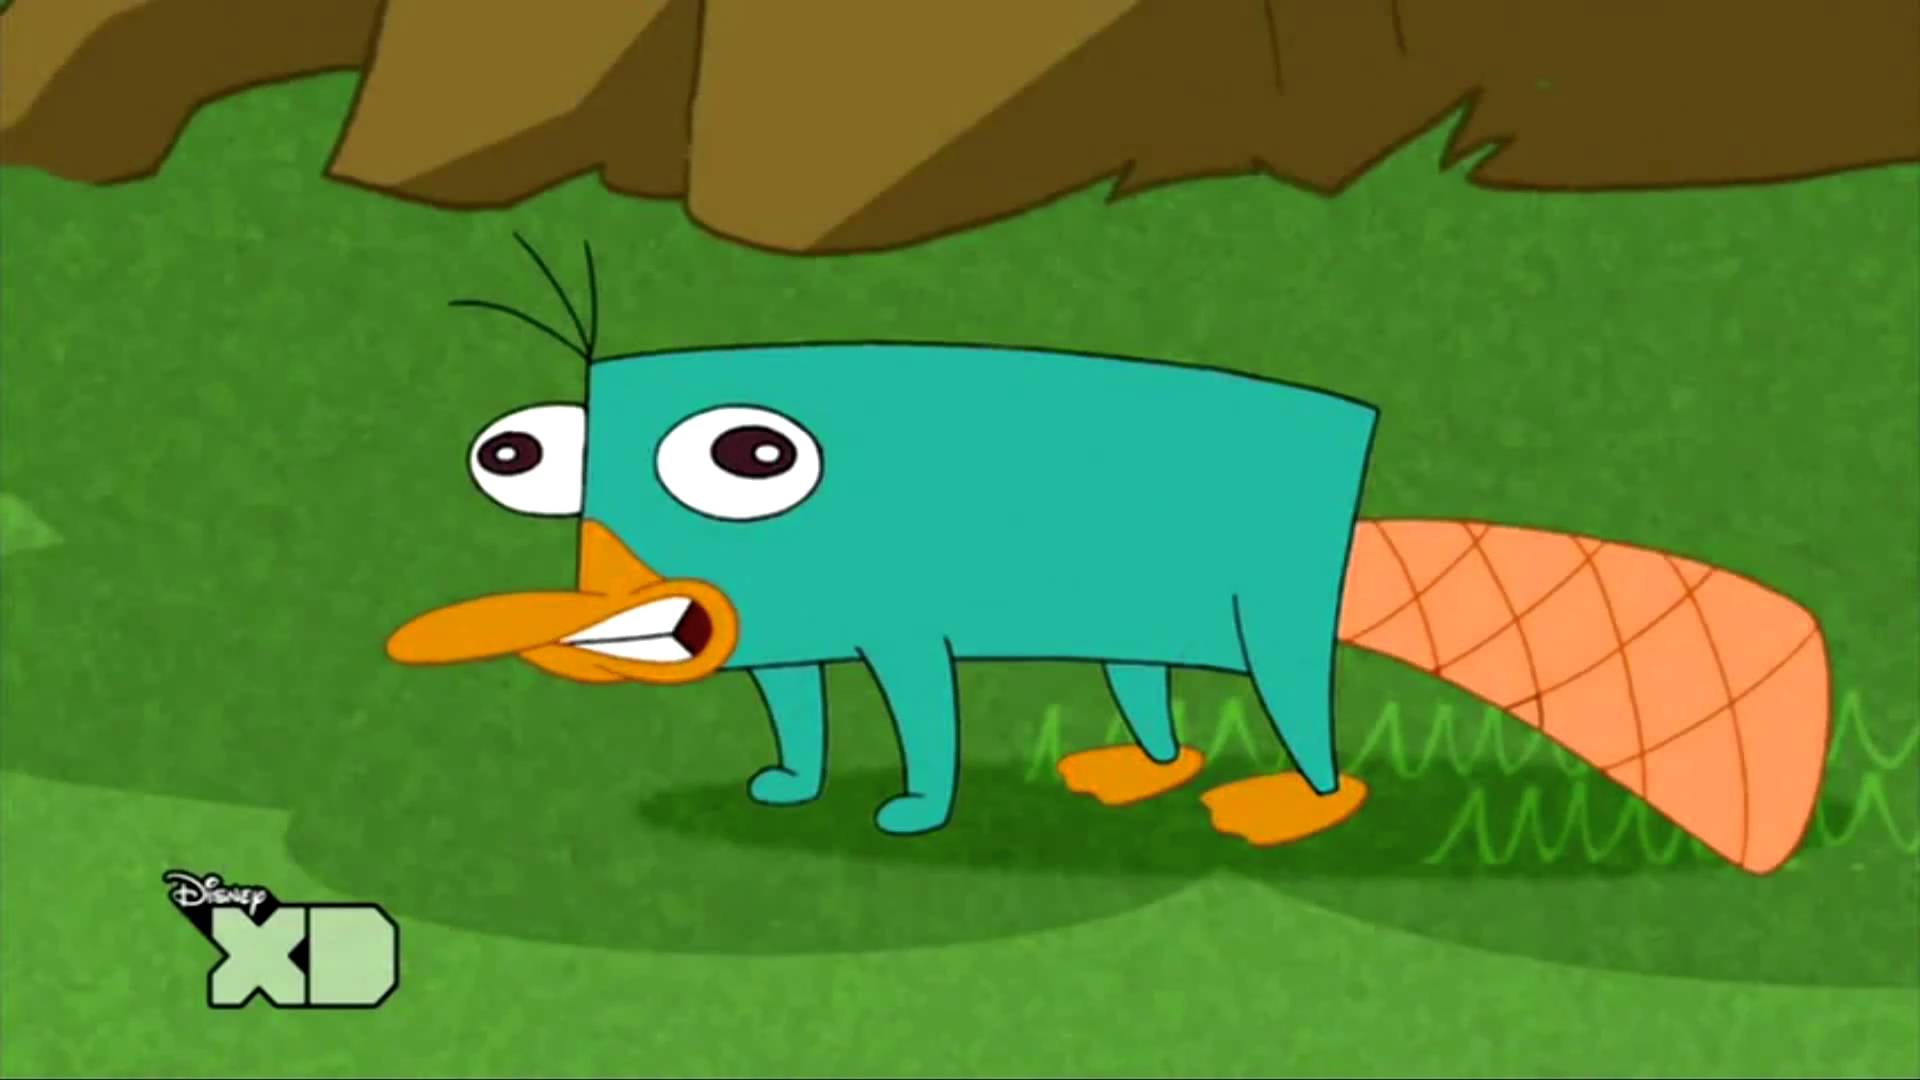 Perry the platypus sound (NL) (Link In Description)